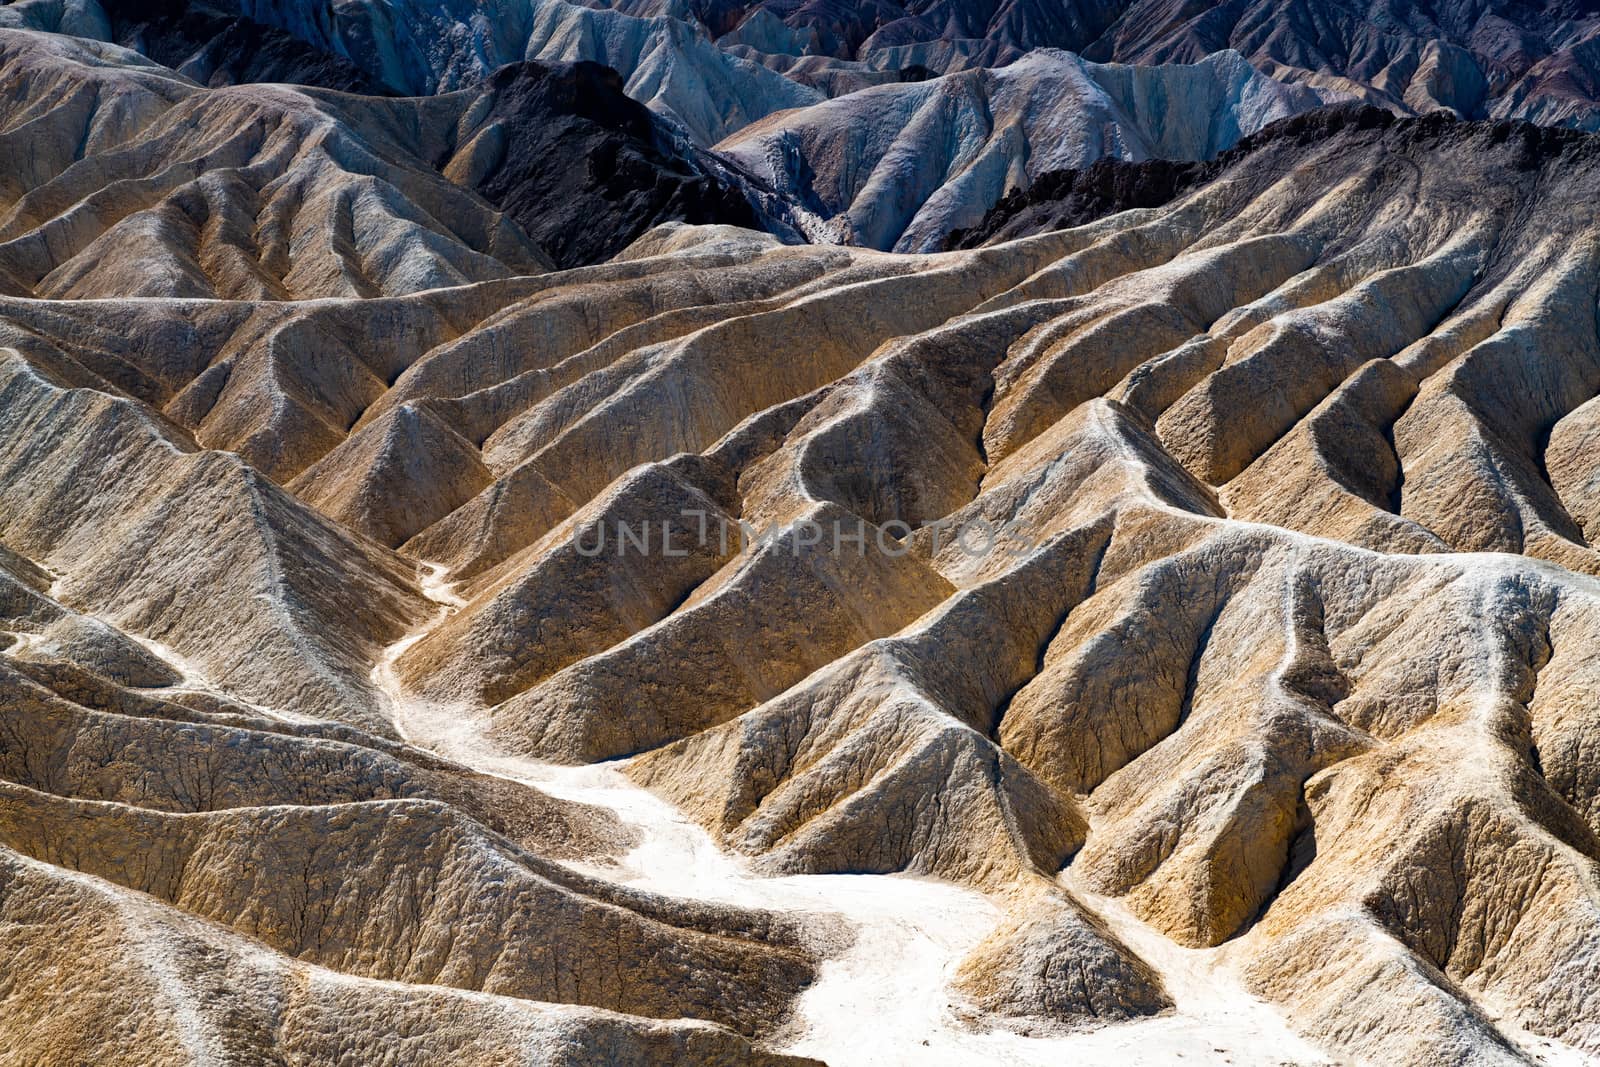 Zabriskie Point, located east of Death Valley in Death Valley National Park in California, United States, noted for its erosional landscape.